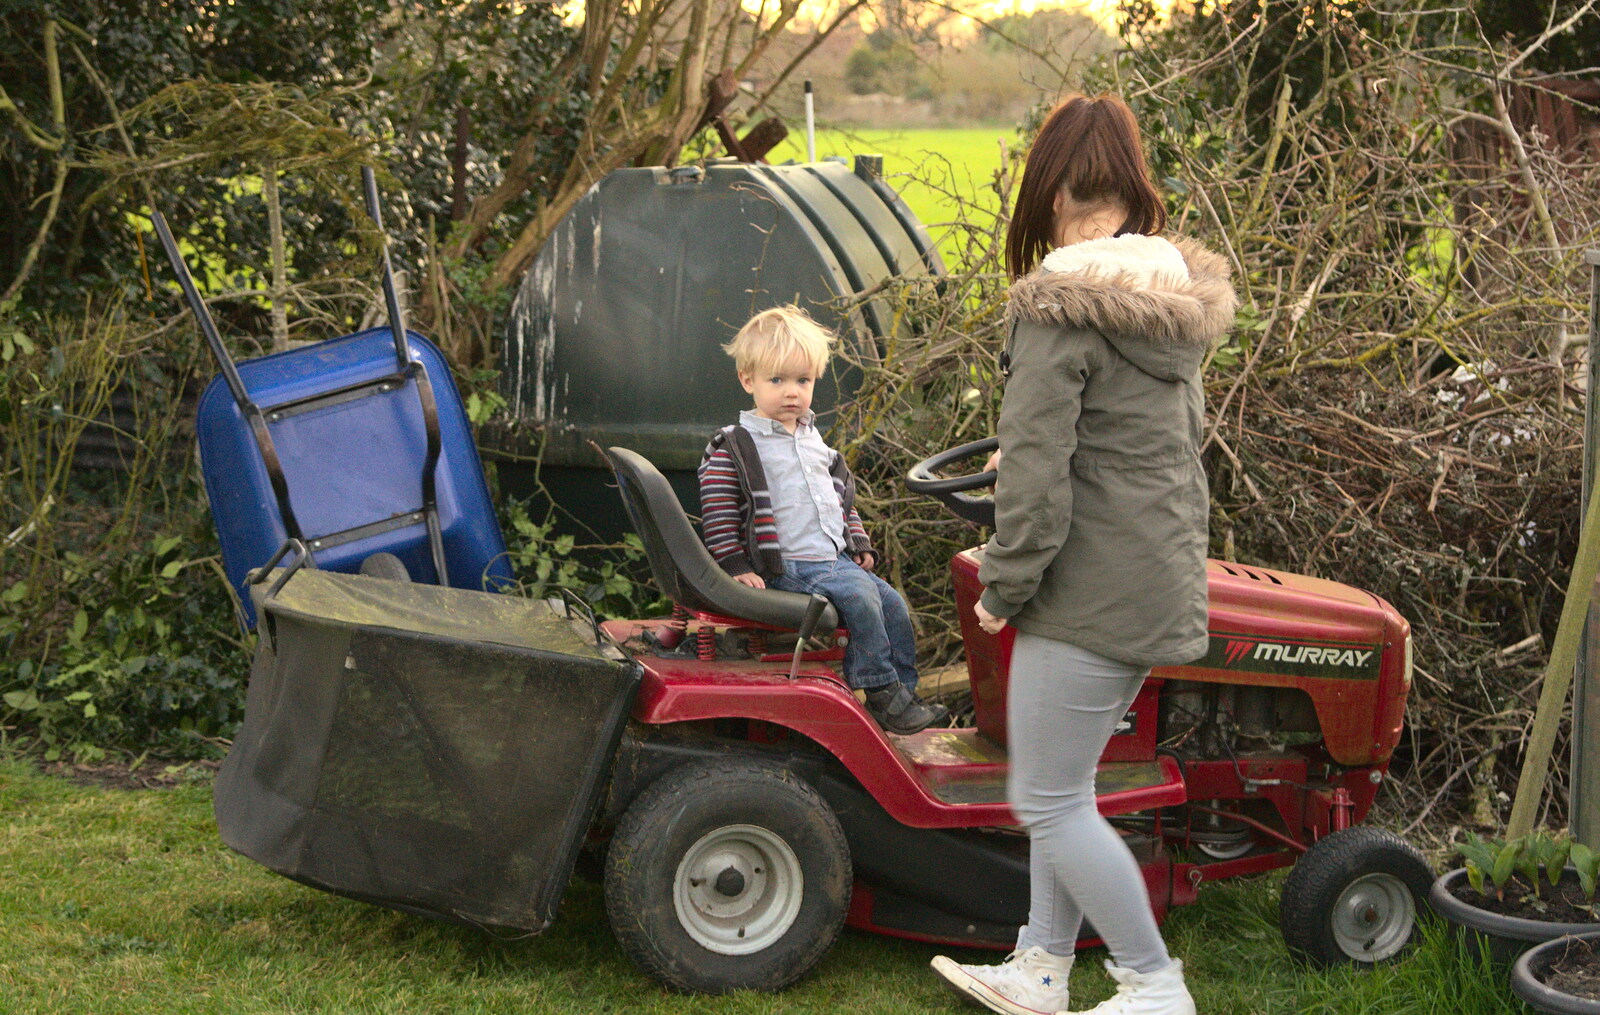 Harry on the lawnmower, with Emily from Emily Comes to Visit, Brome, Suffolk - 15th March 2014